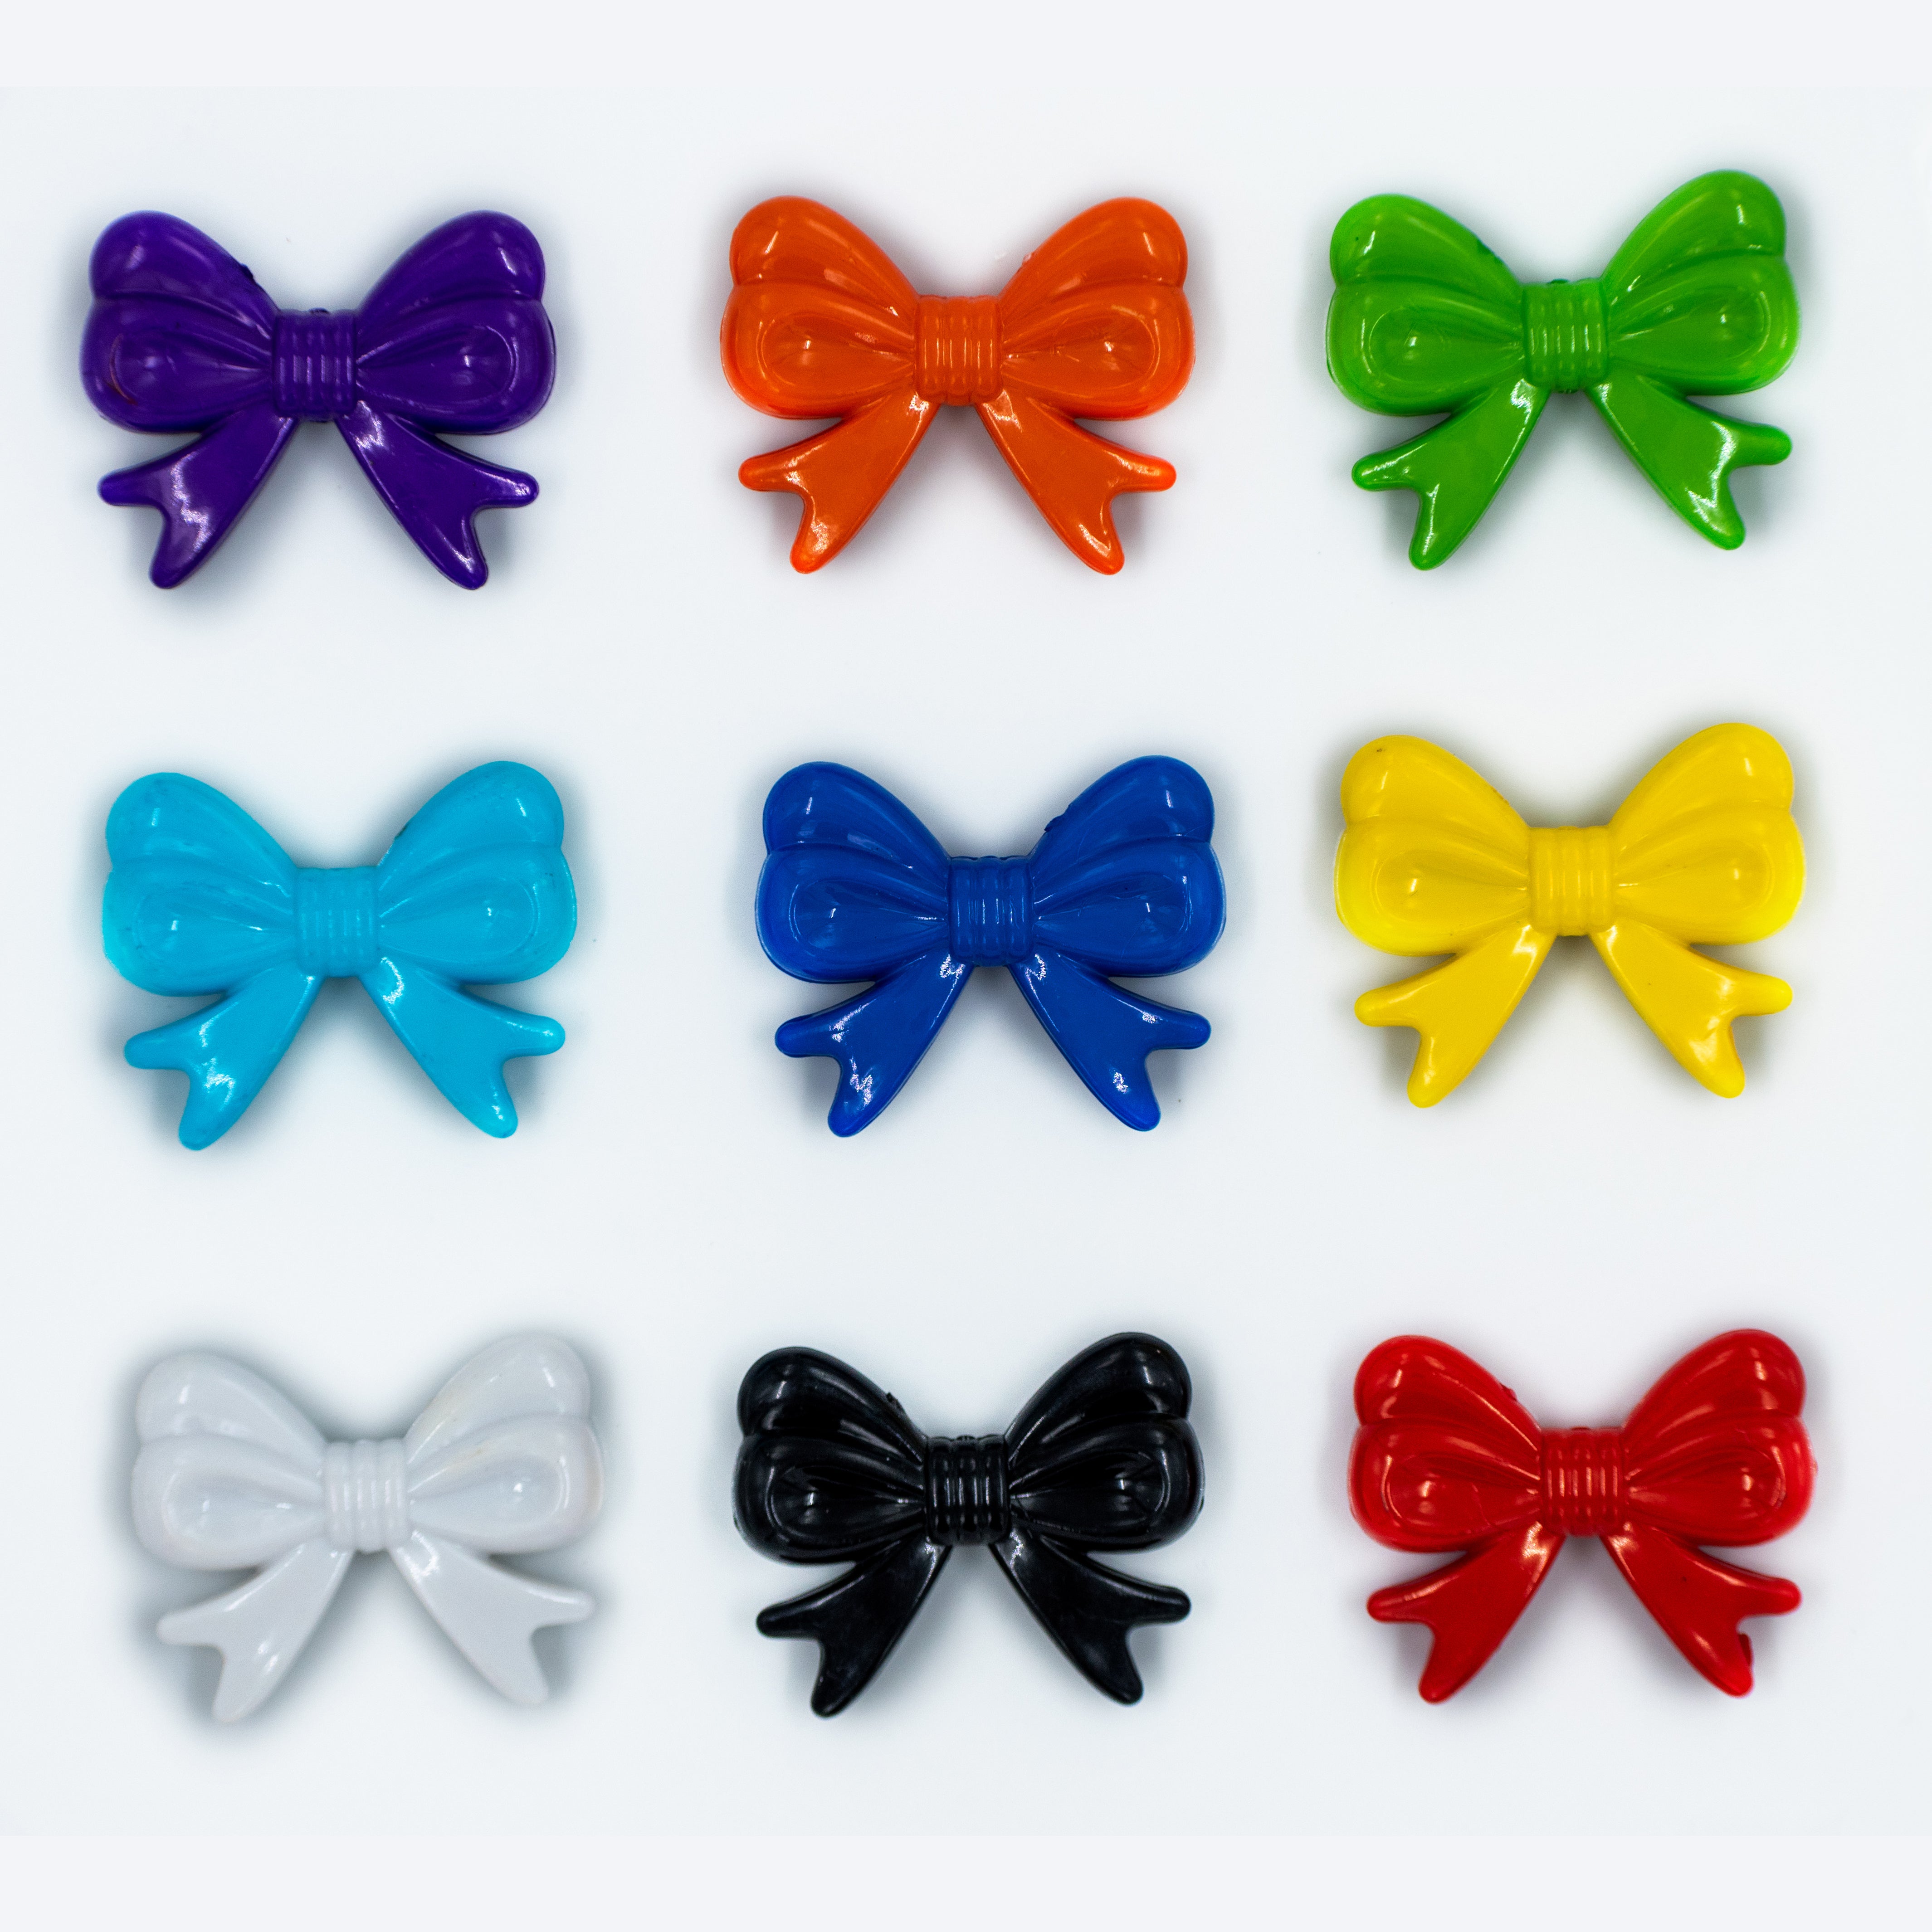 Acrylic Bows Focals for chunky bubblegum bead creations - 46mm [2 per